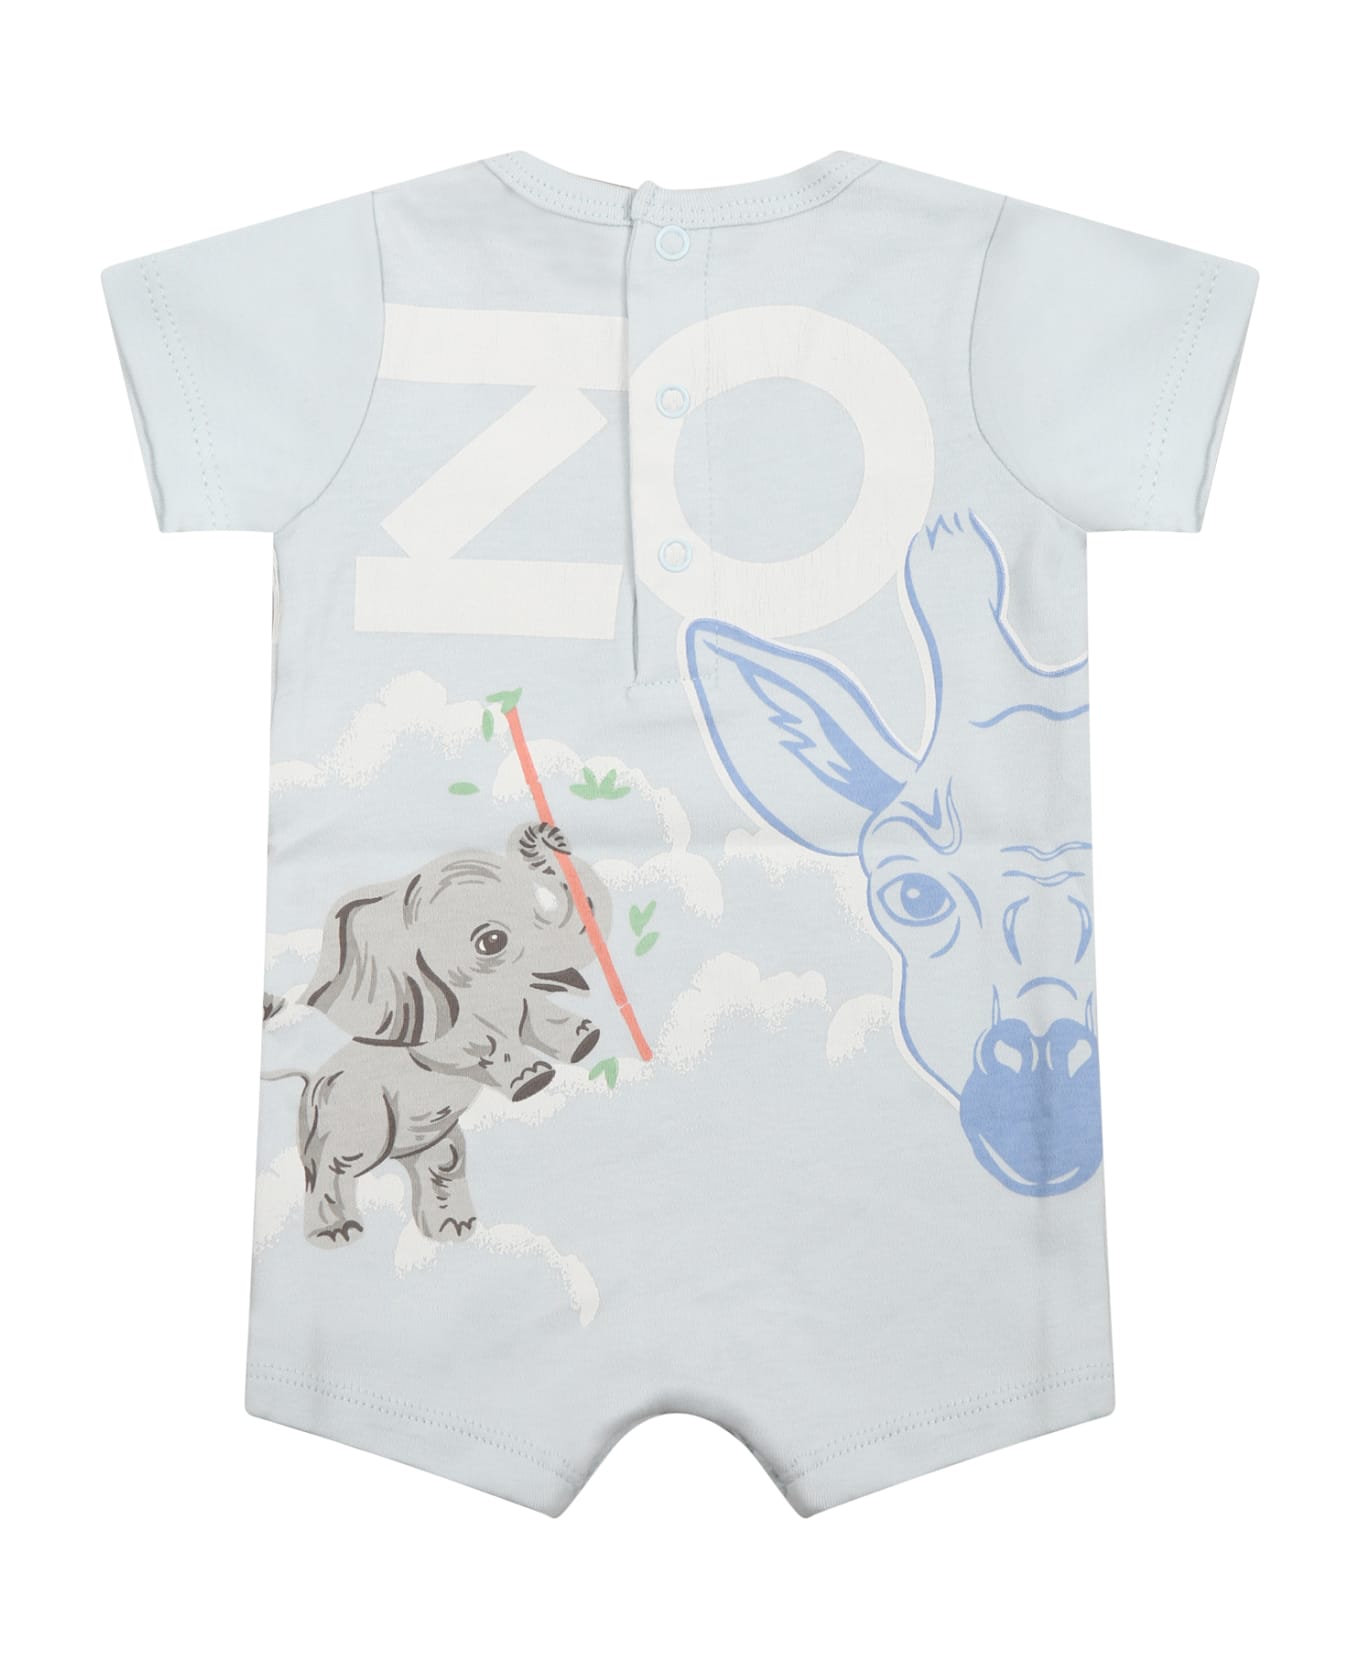 Kenzo Kids Light Blue Romper For Baby Boy With Animals And Logo - Light Blue